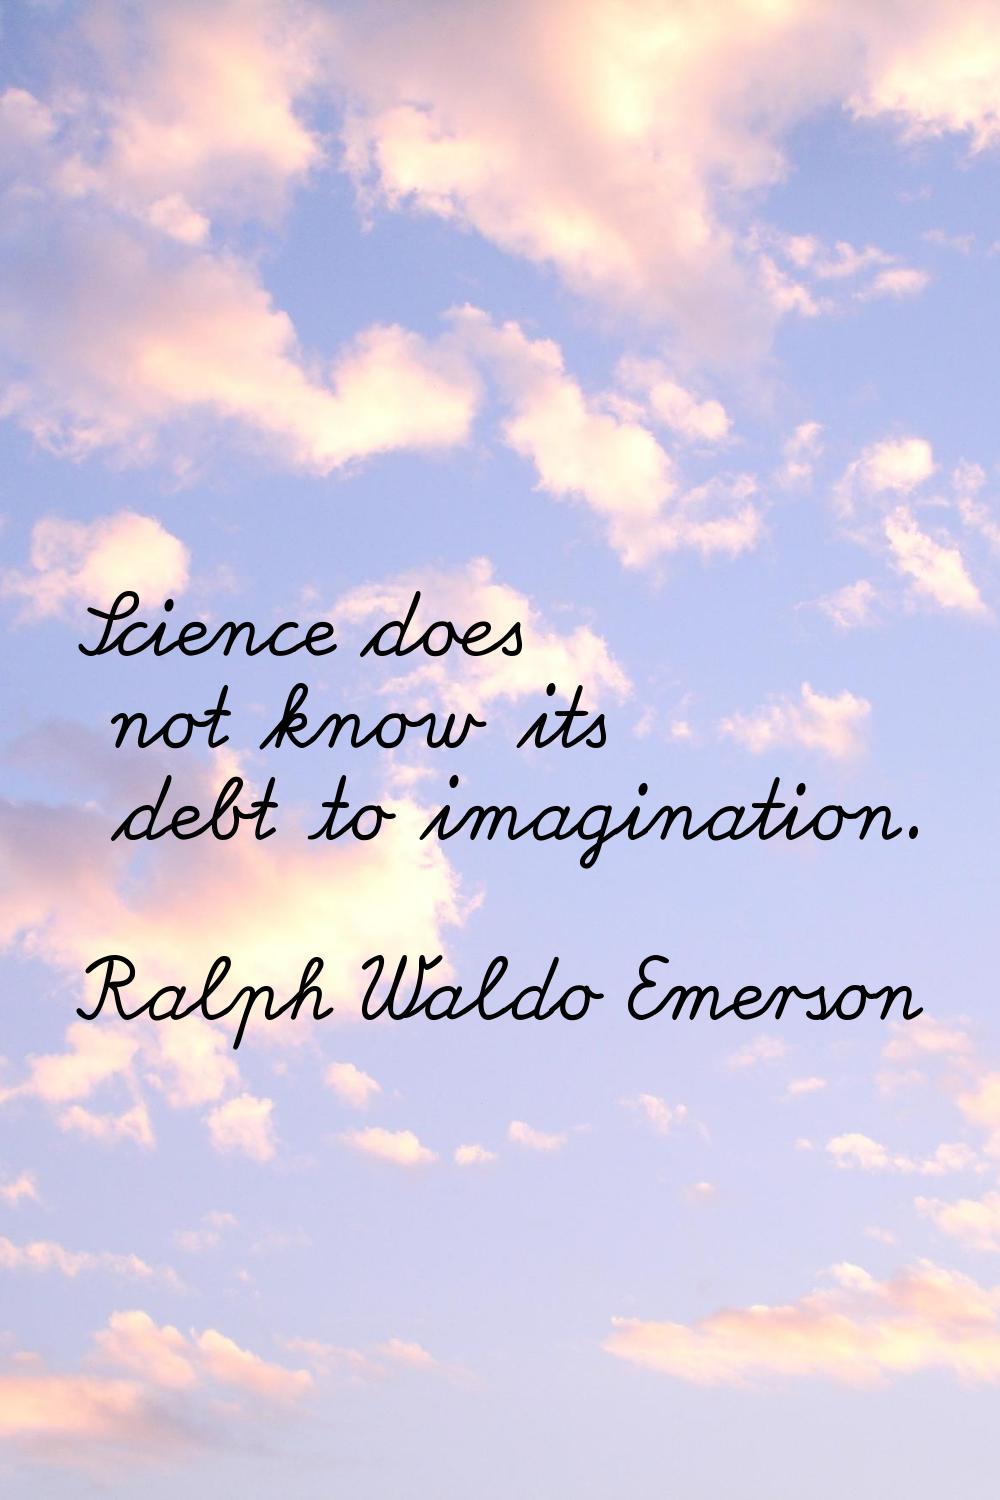 Science does not know its debt to imagination.